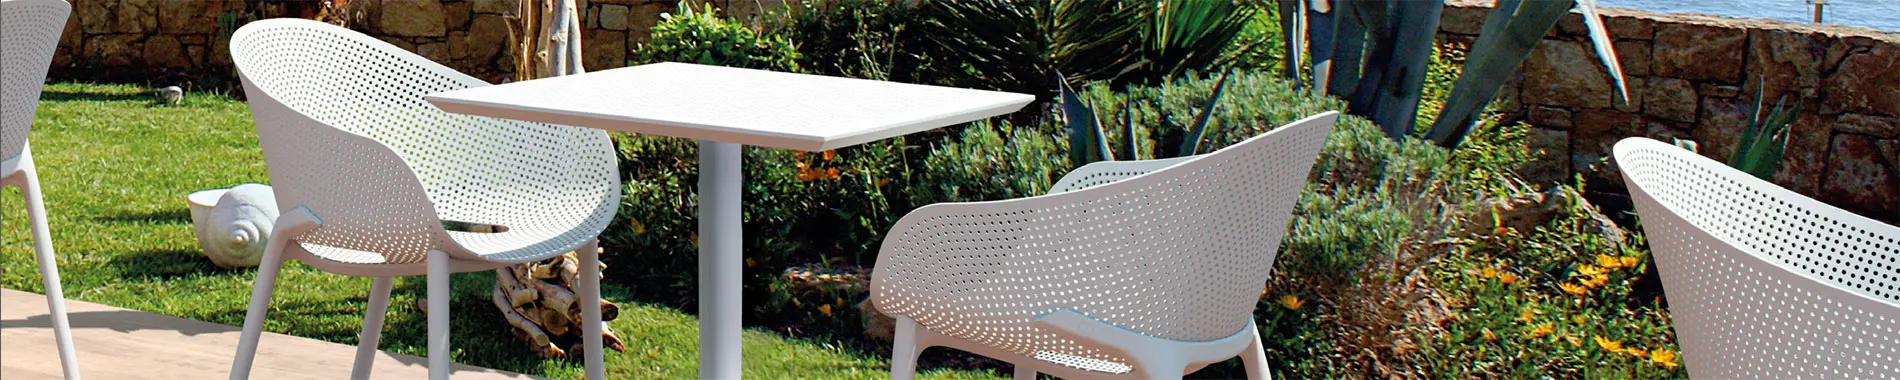 Outdoor furniture from the collection: Polipropilene